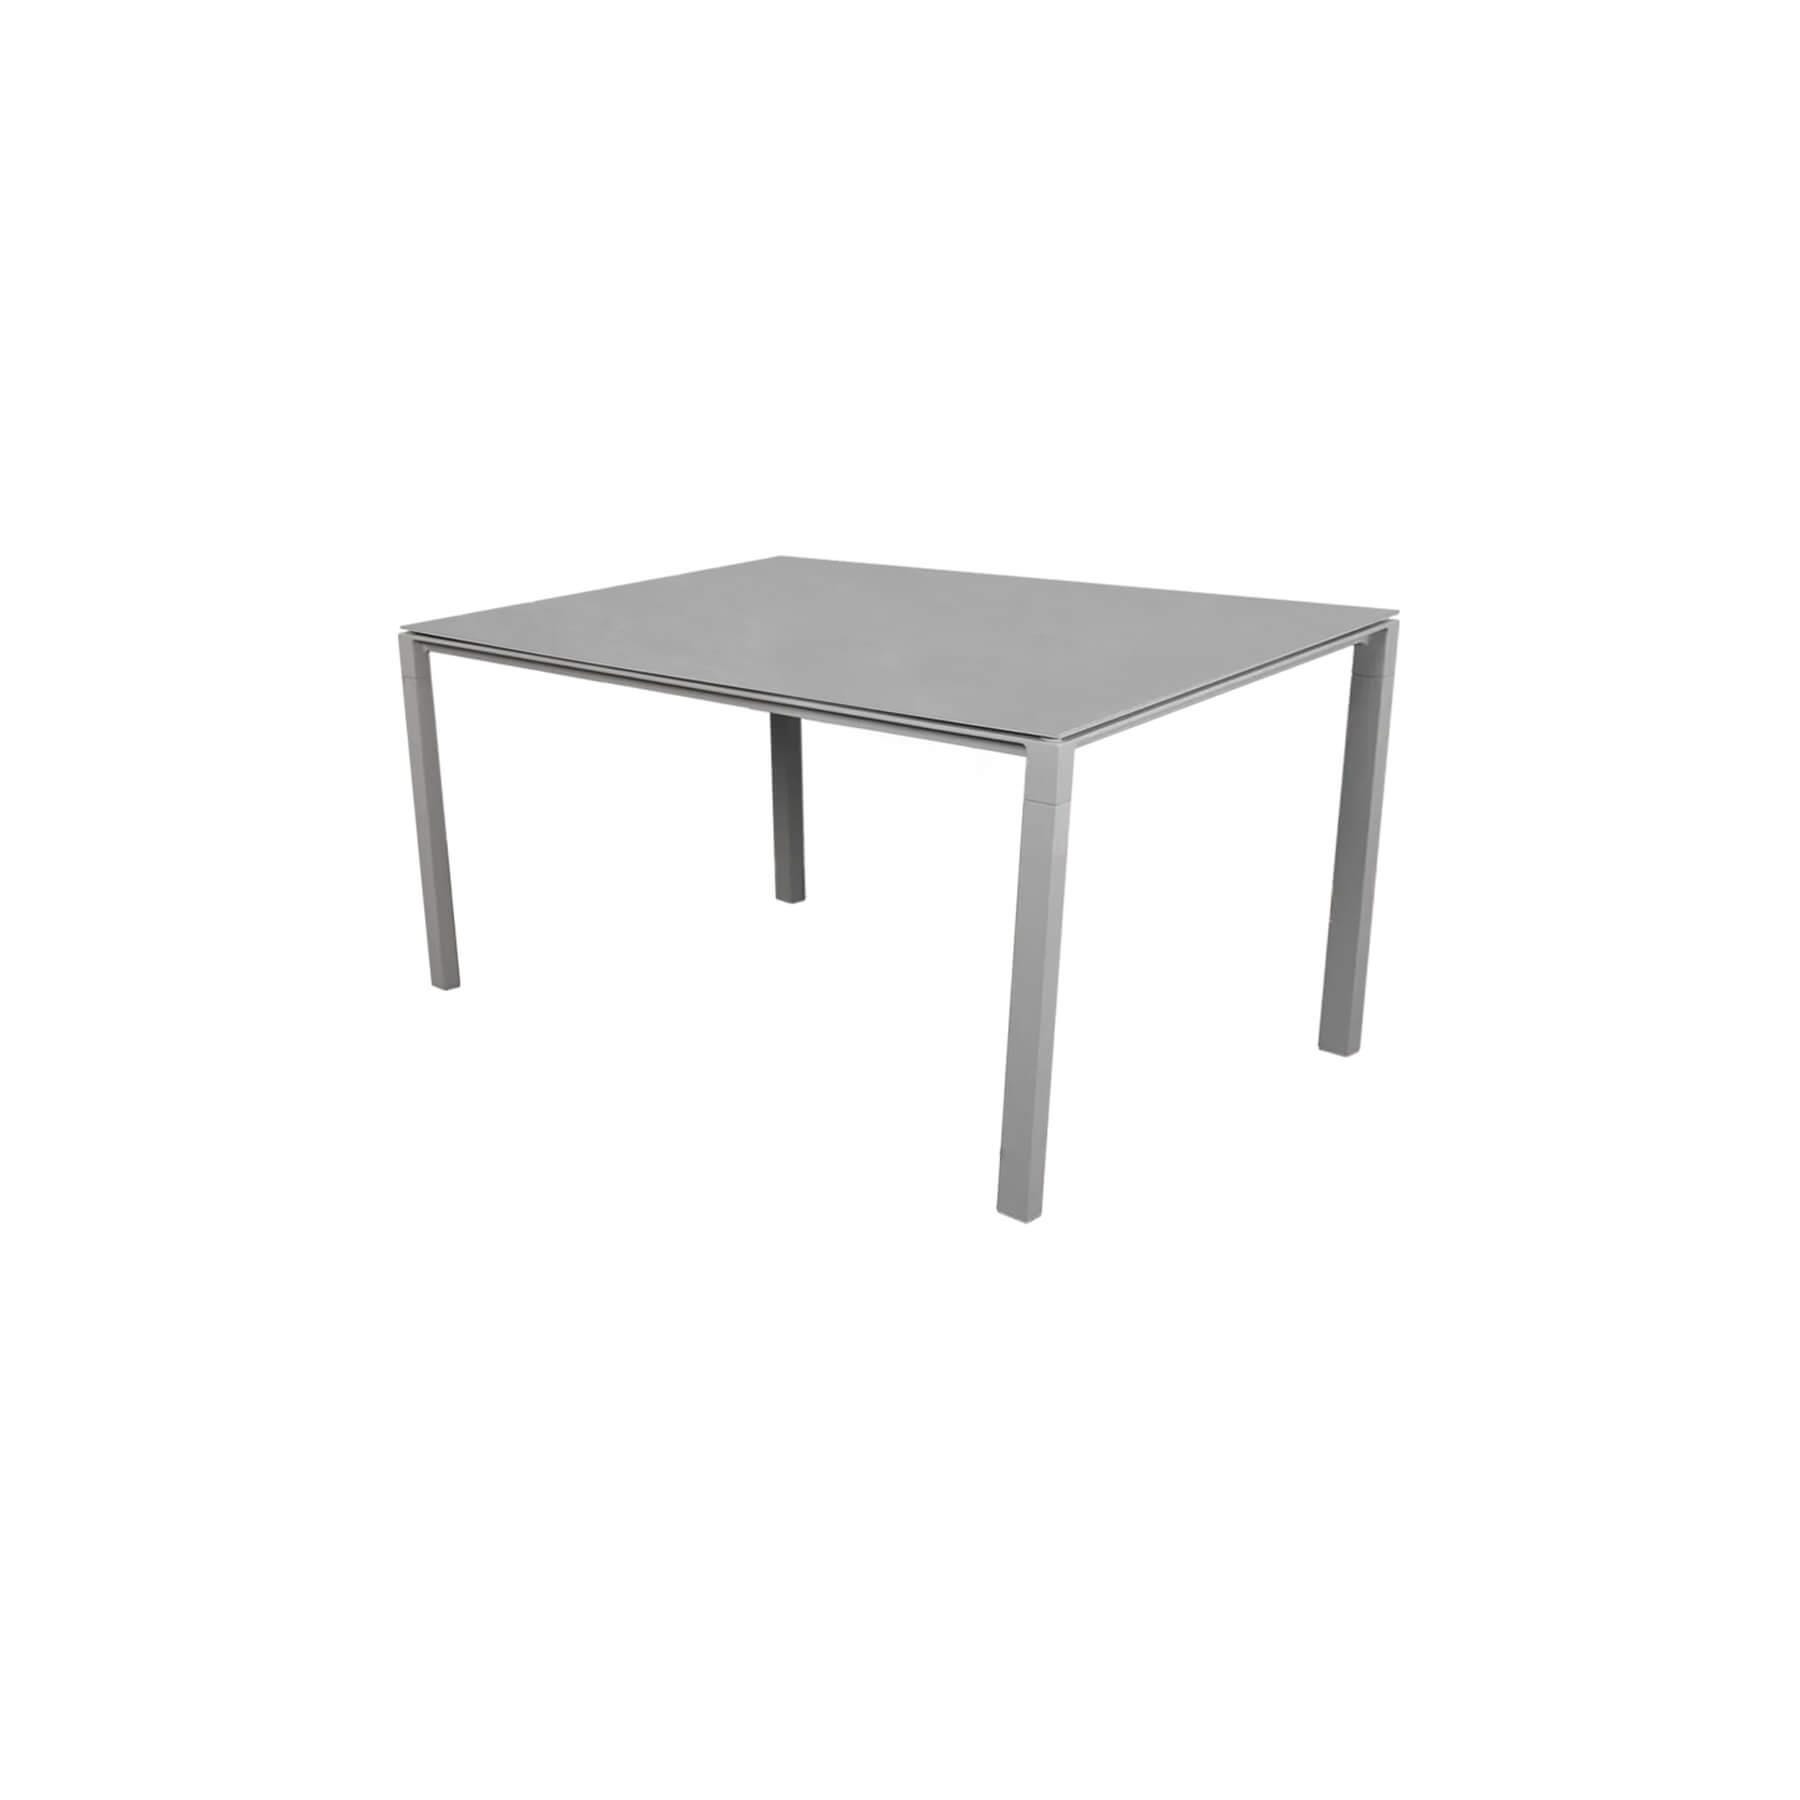 Caneline Pure Outdoor Dining Table Small Ceramic Concrete Grey Top Light Grey Legs